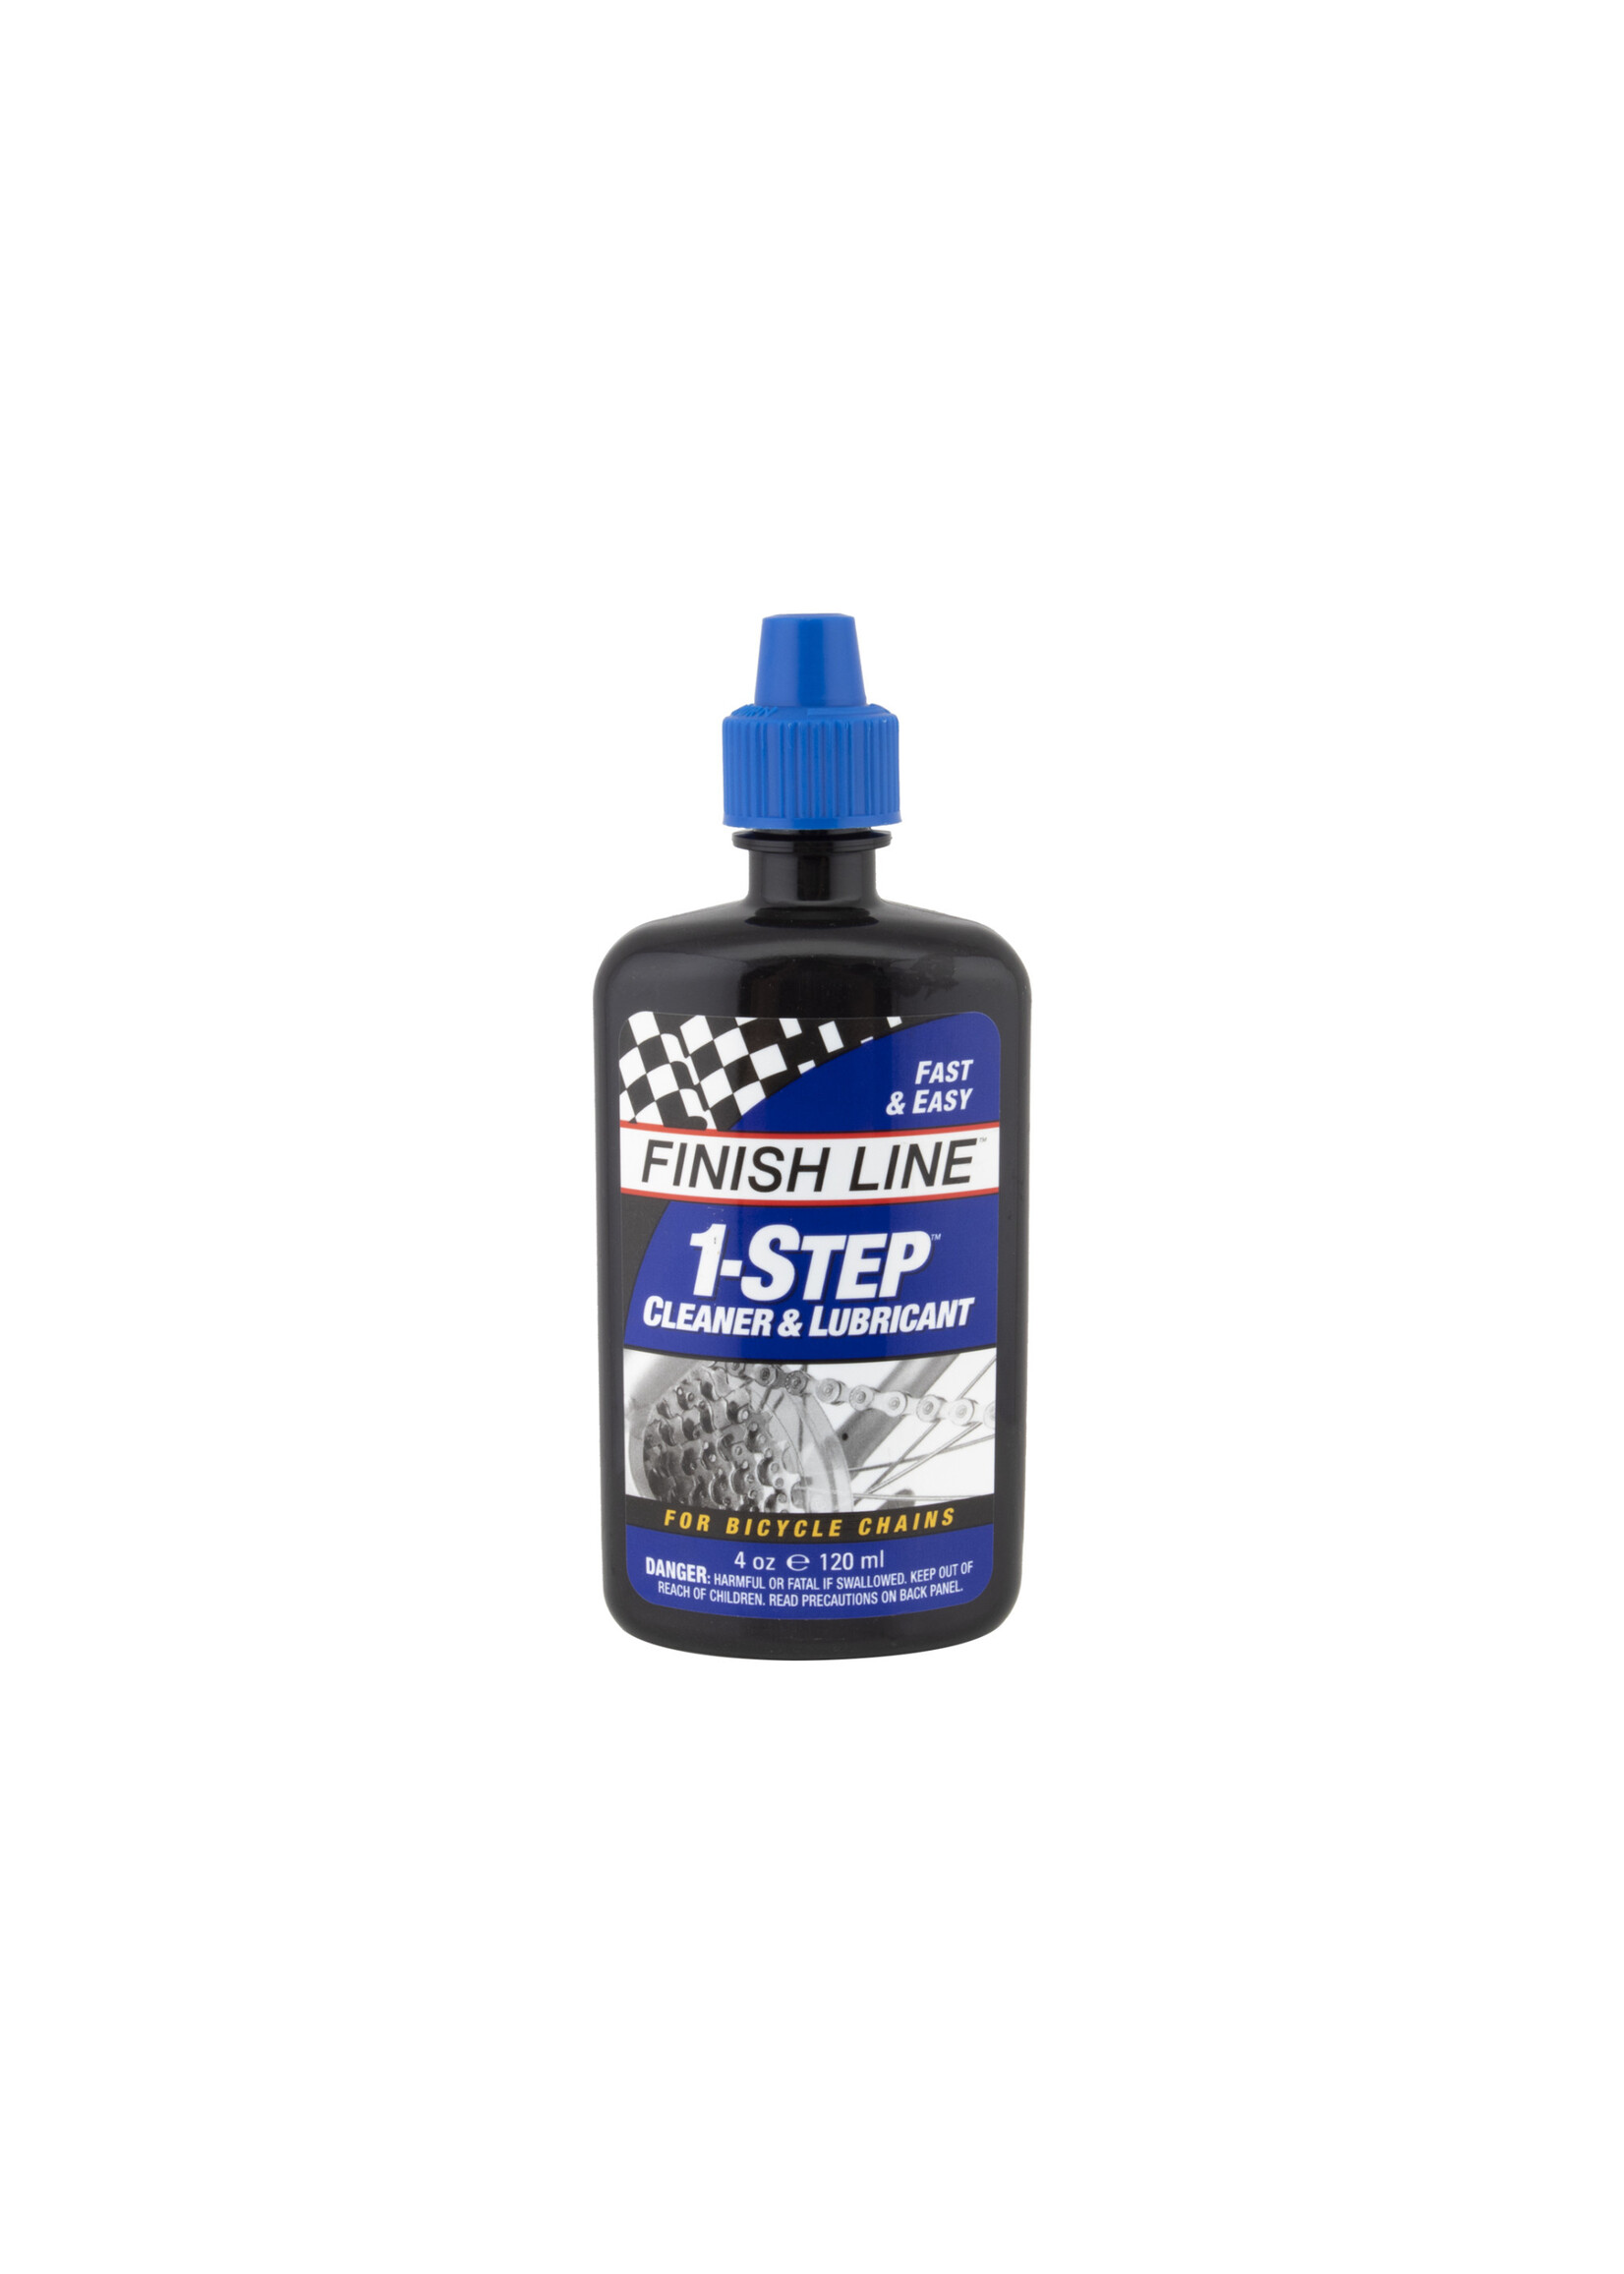 FINISH LINE Finish Line 1 Step Cleaner & Lubricant